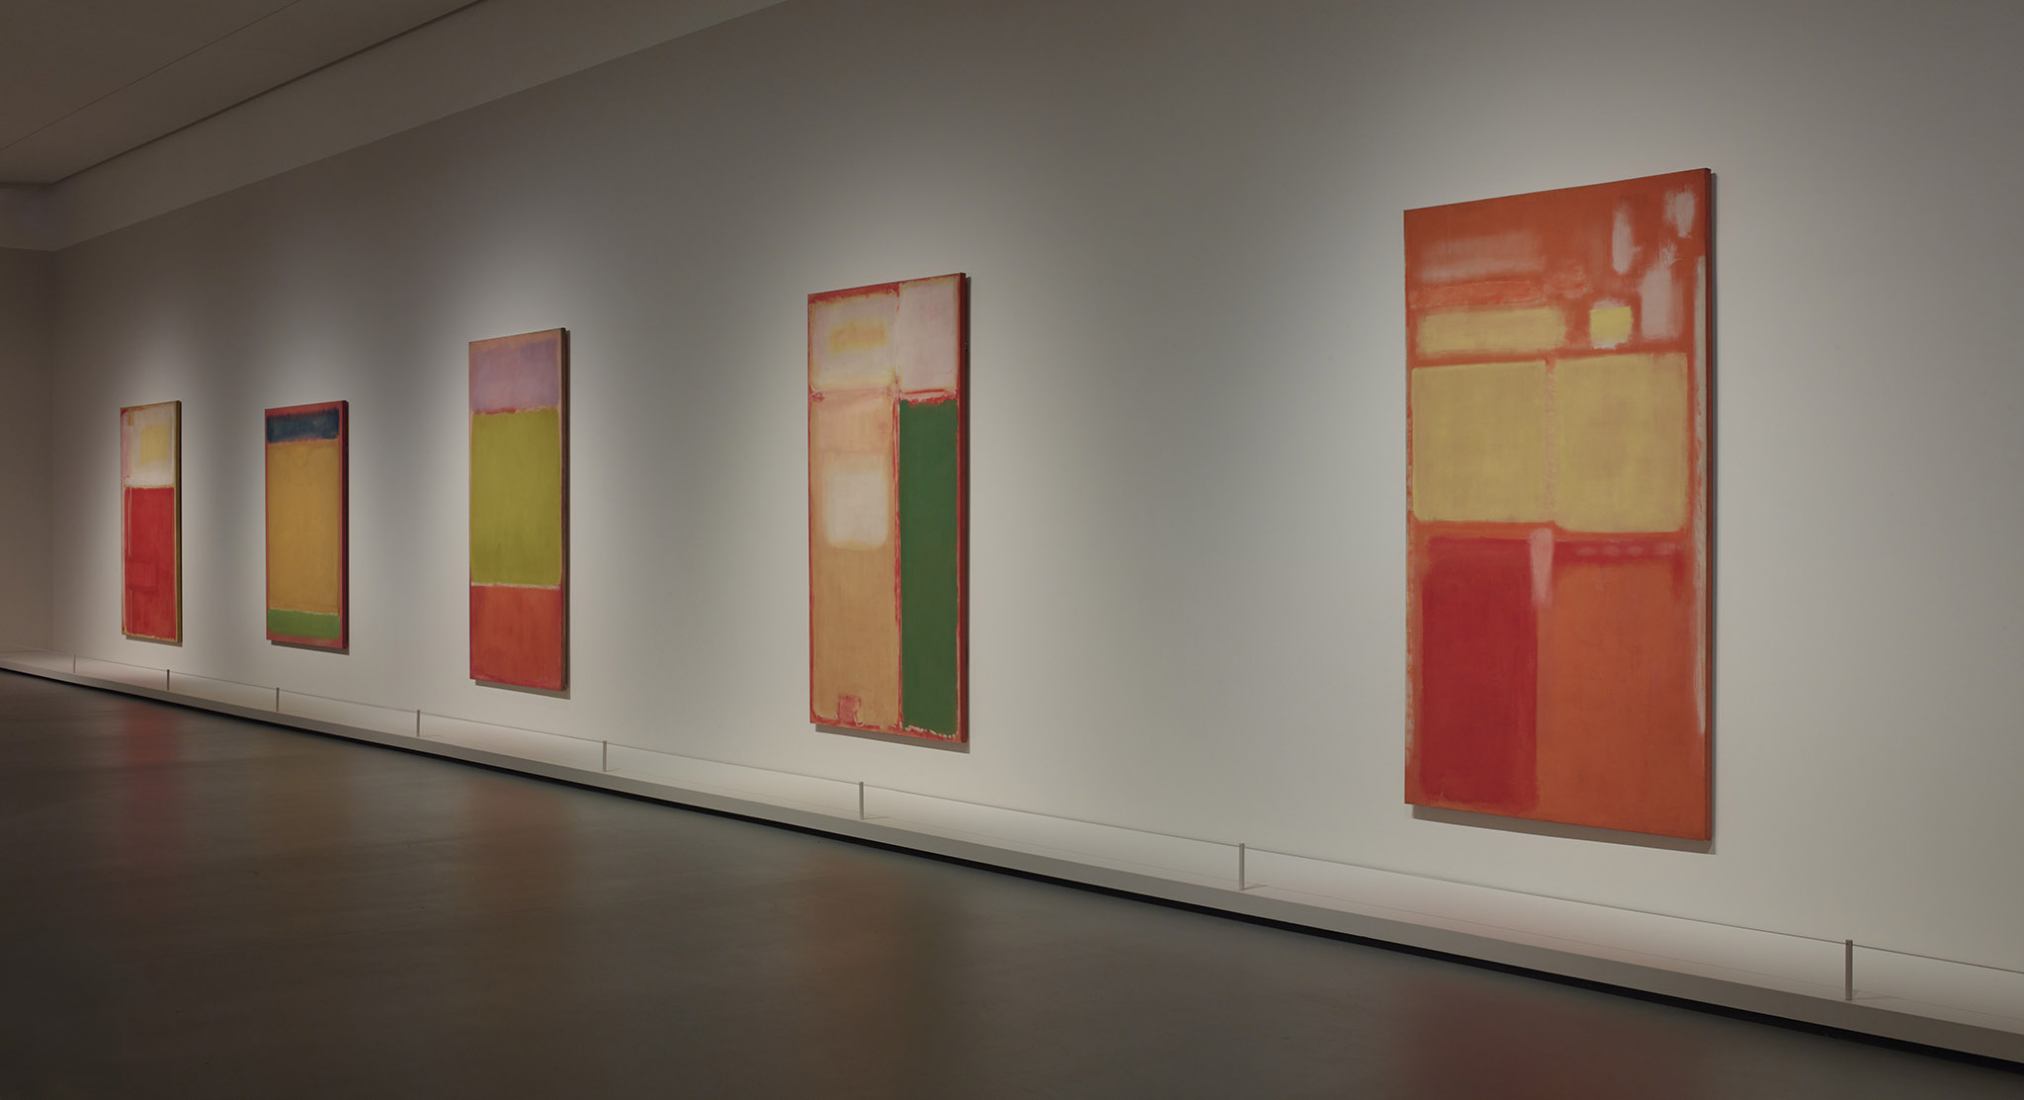 Soldan sağa: Mark Rothko, 1949 No. 8, 1949 Untitled (Blue, Yellow, Green on Red), 1954 No. 7, 1951 No. 1-20, 1949 No. 21 (Untitled), Fotoğraf: Courtesy of Louis Vuitton Foundation